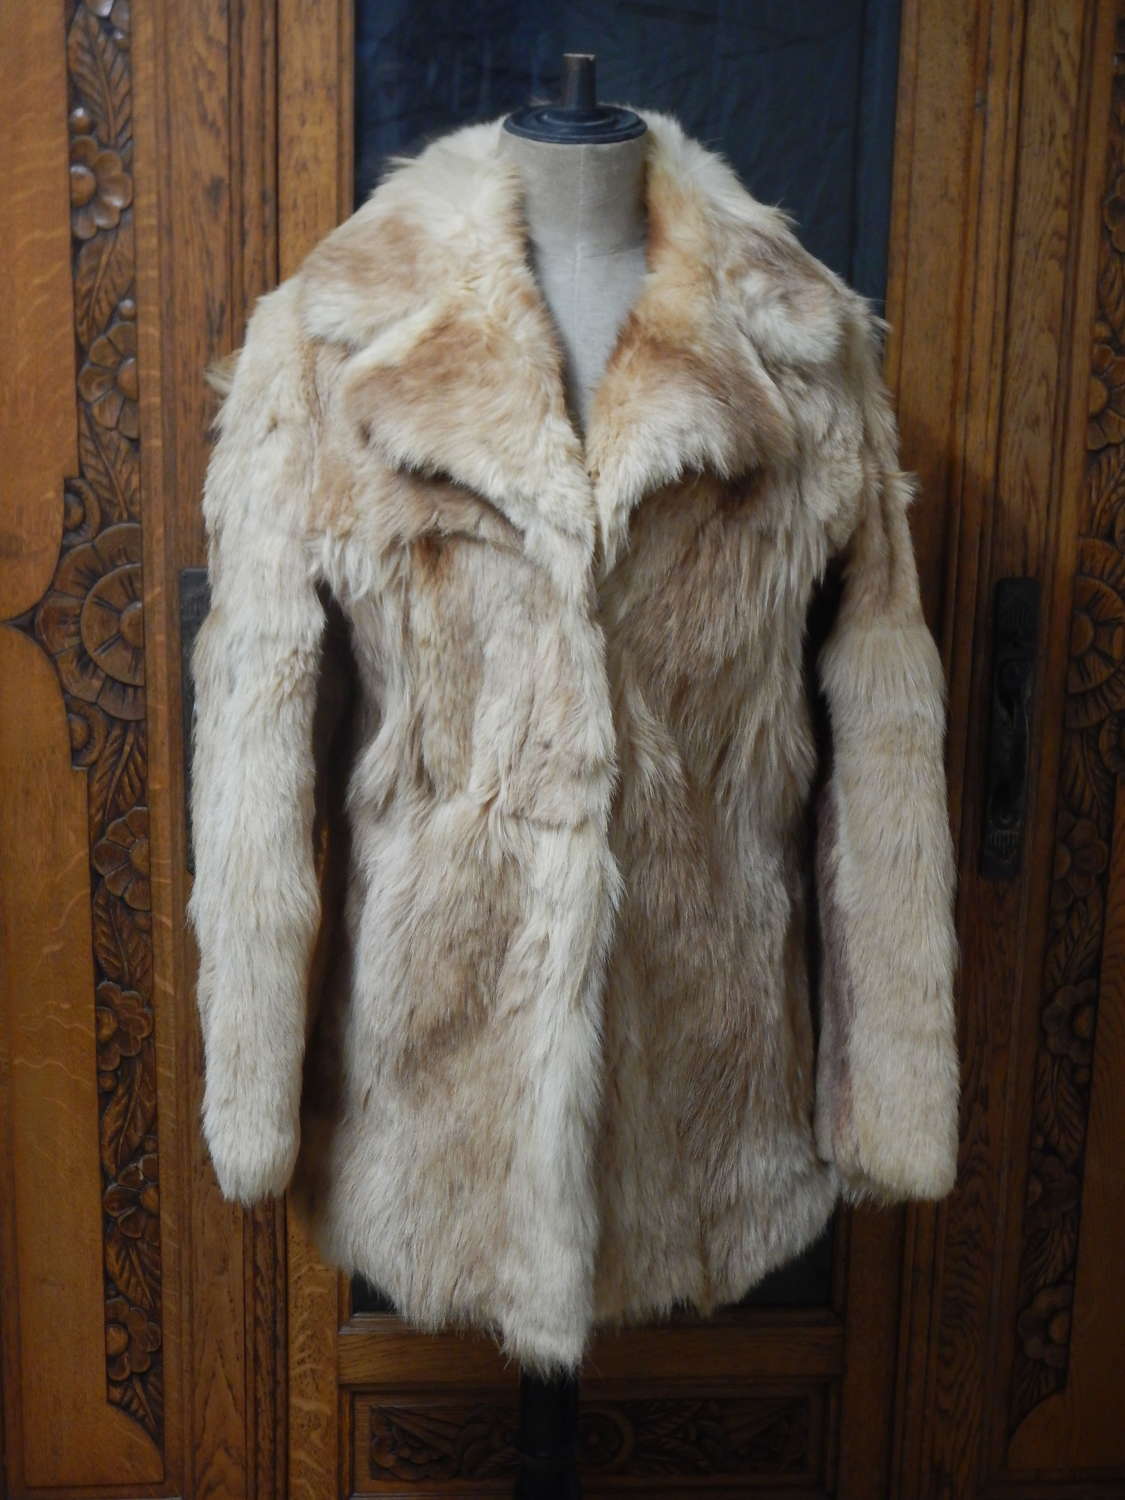 Golden Fox Fur and Satin - Classic 1950s French Vintage Fox Fur - Long